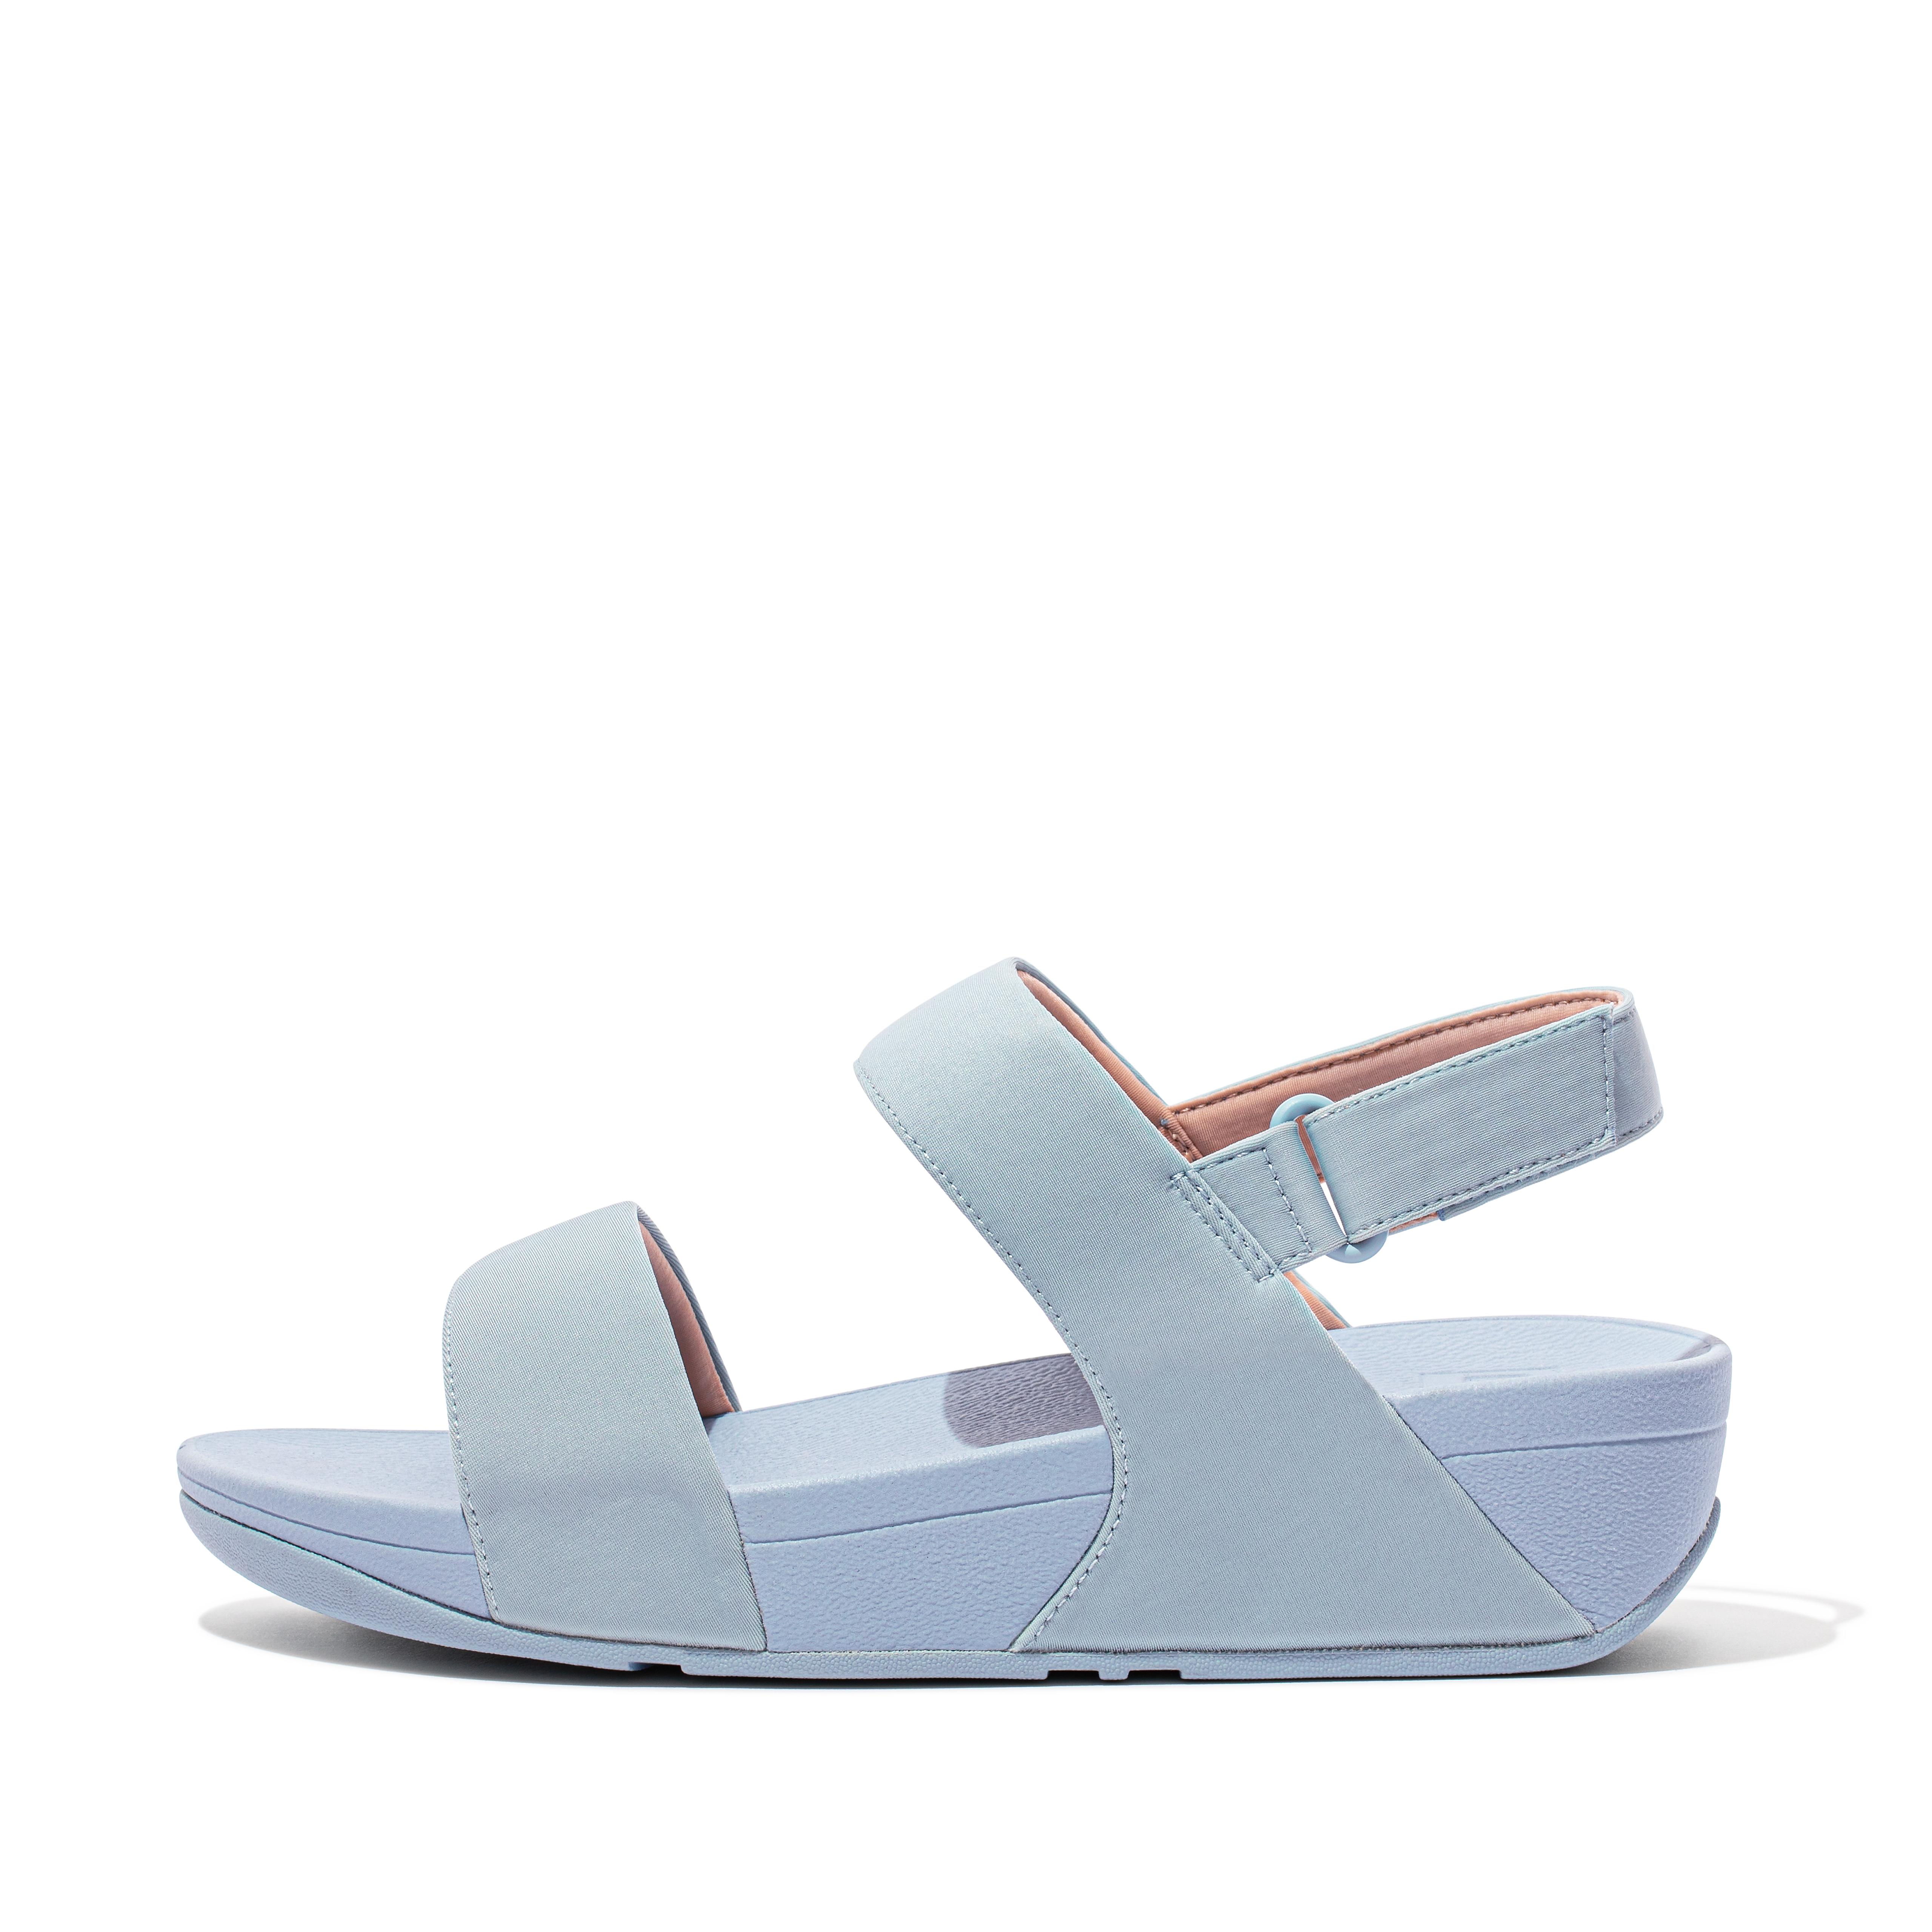 Us fitflop FitFlop